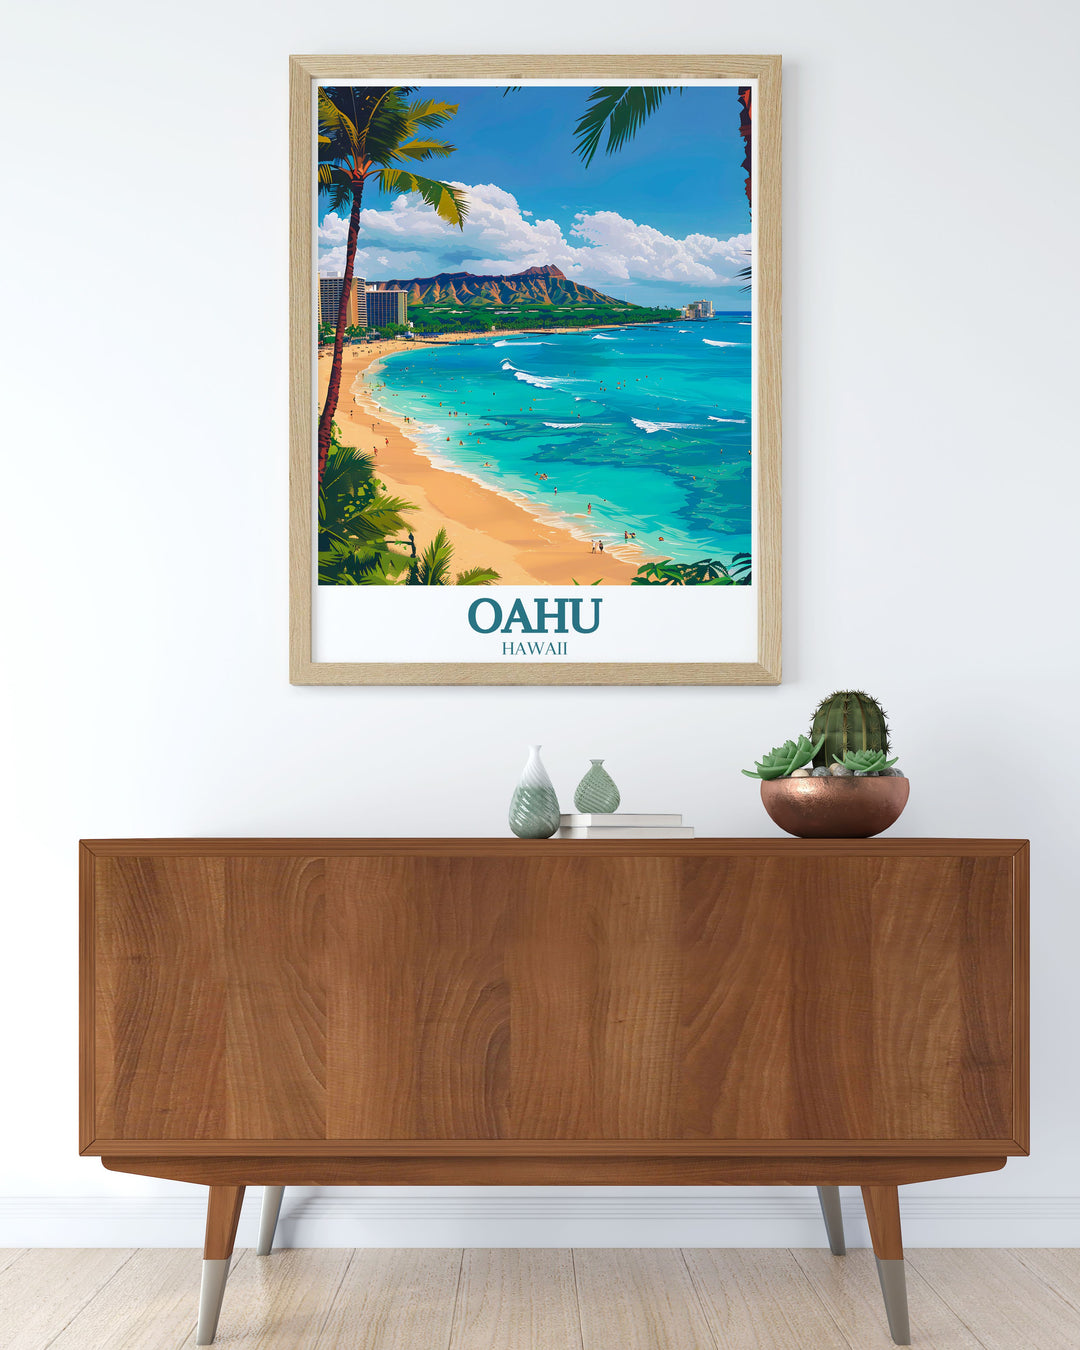 Bring the essence of Hawaii into your home with this Oahu wall art featuring Waikiki Beach and Diamond Head Crater a perfect addition to your travel themed decor.